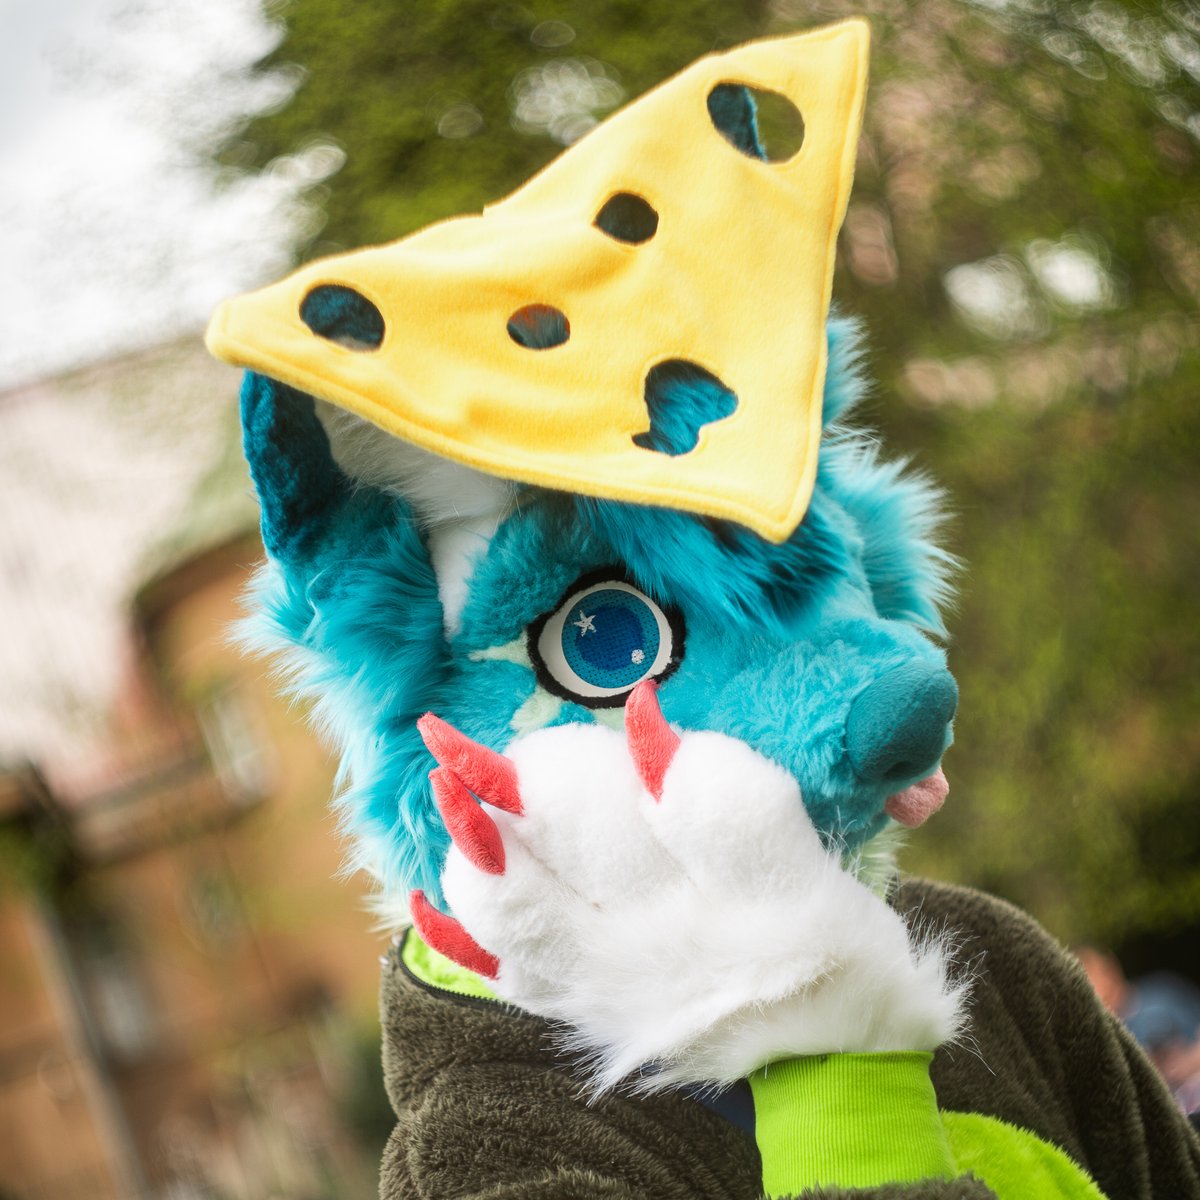 💙💚What a tasty husky😋Is there any one so hungry? 🌈💚💙
Its hufky🙈
📷 @cloniksphotos
🧵@Bambilijas
#happyfursuitfriday
#furry #furryfandom #furries #furrbaby #furry2023 #furry_irl #furrbabies #furrycommunity #furryfriends #furryfriend #furrsuit  #furryadoptable #furryhusky